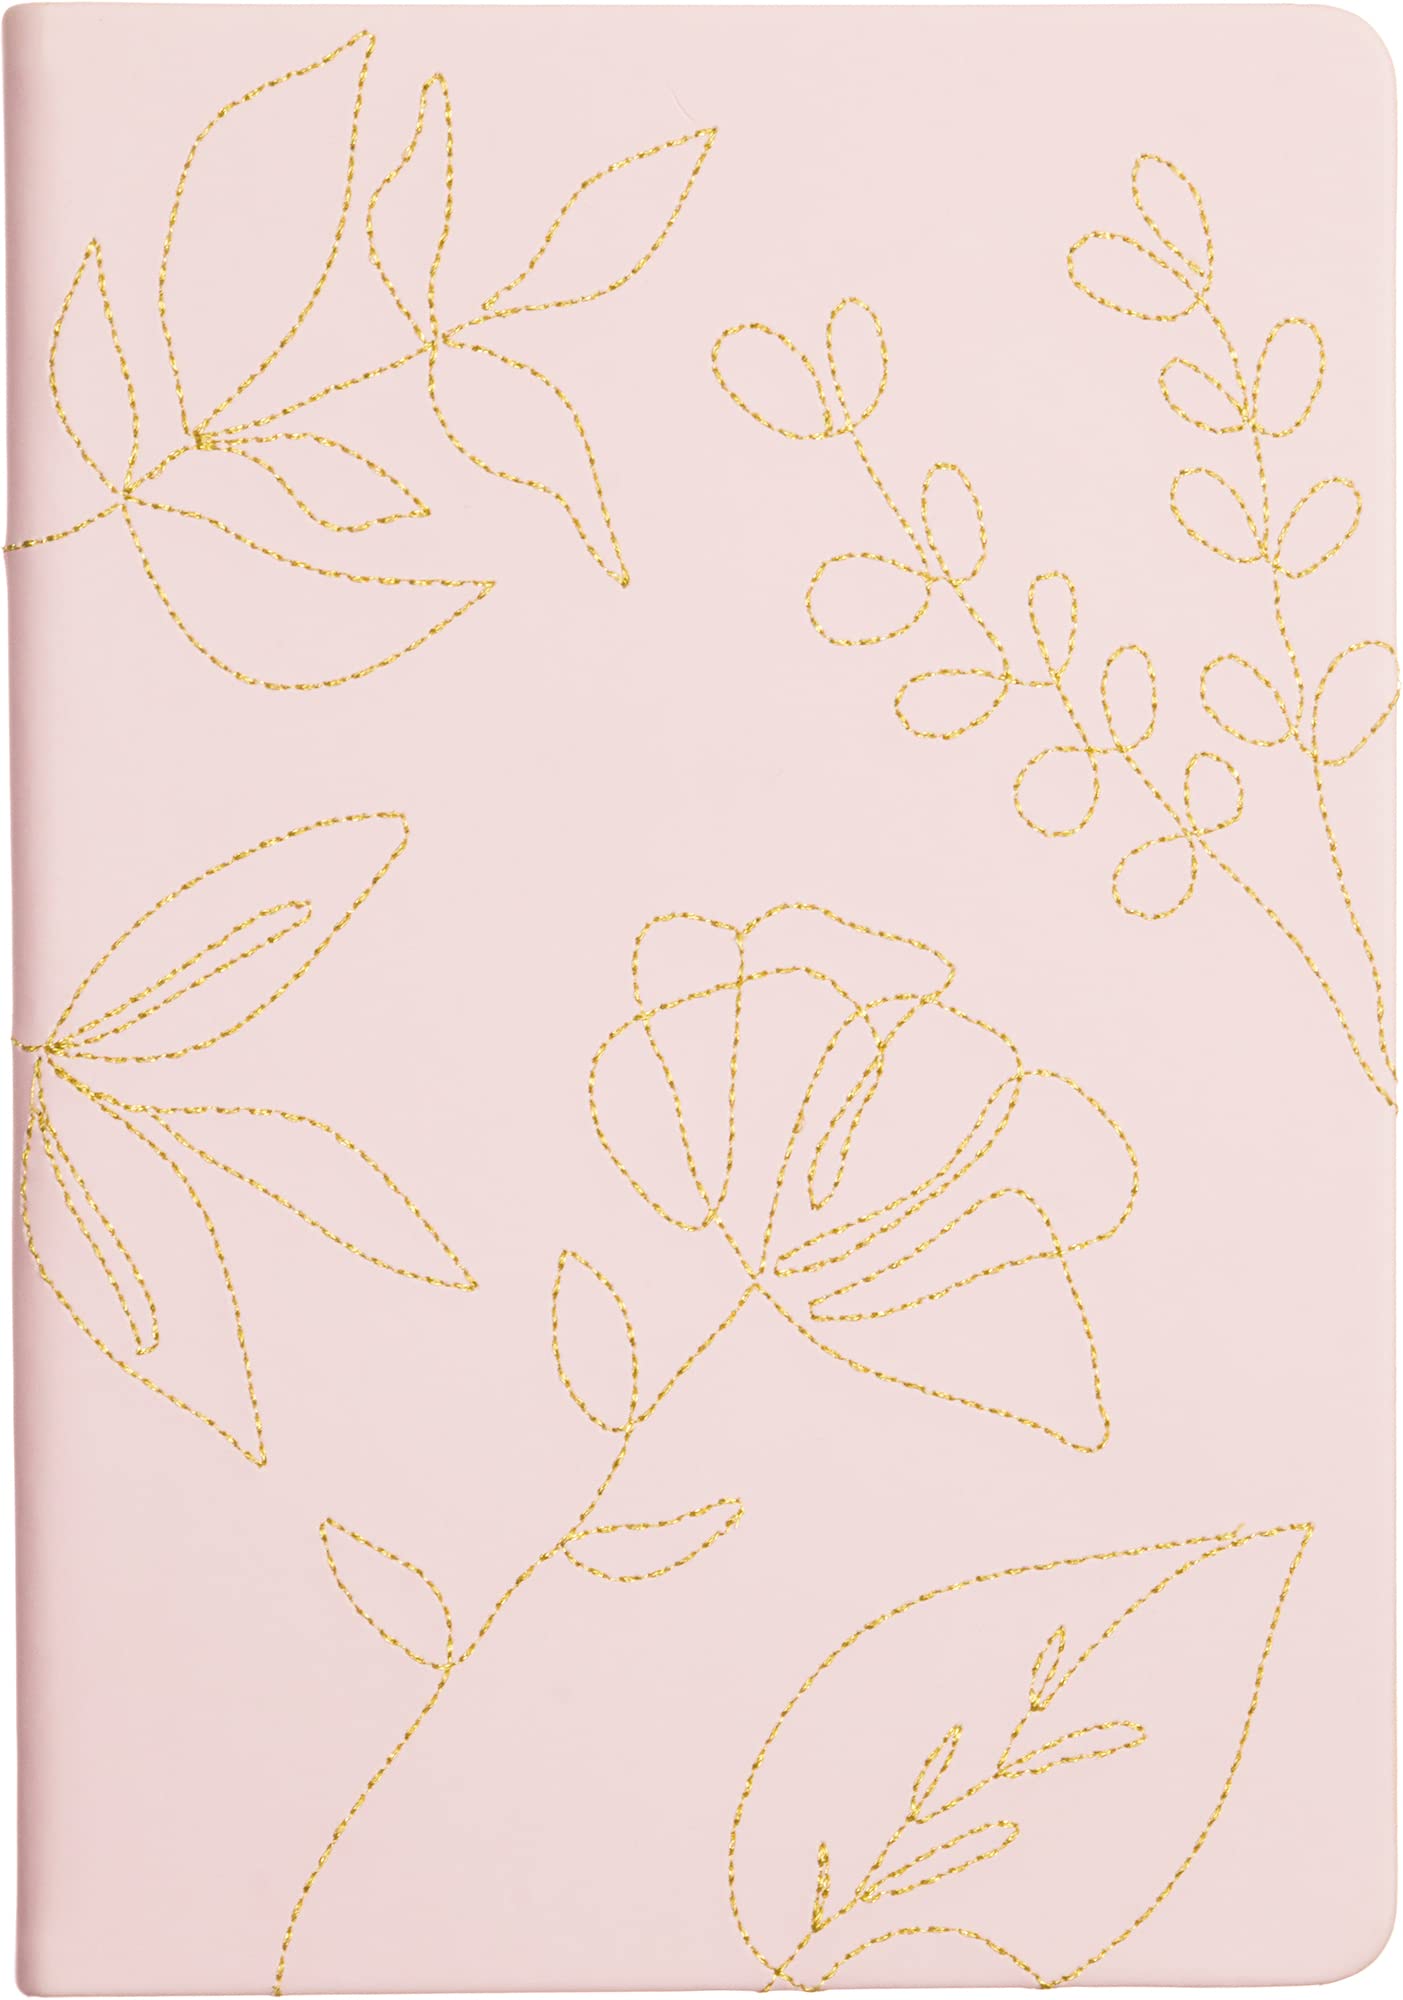 Eccolo Medium Lined Journal Cover